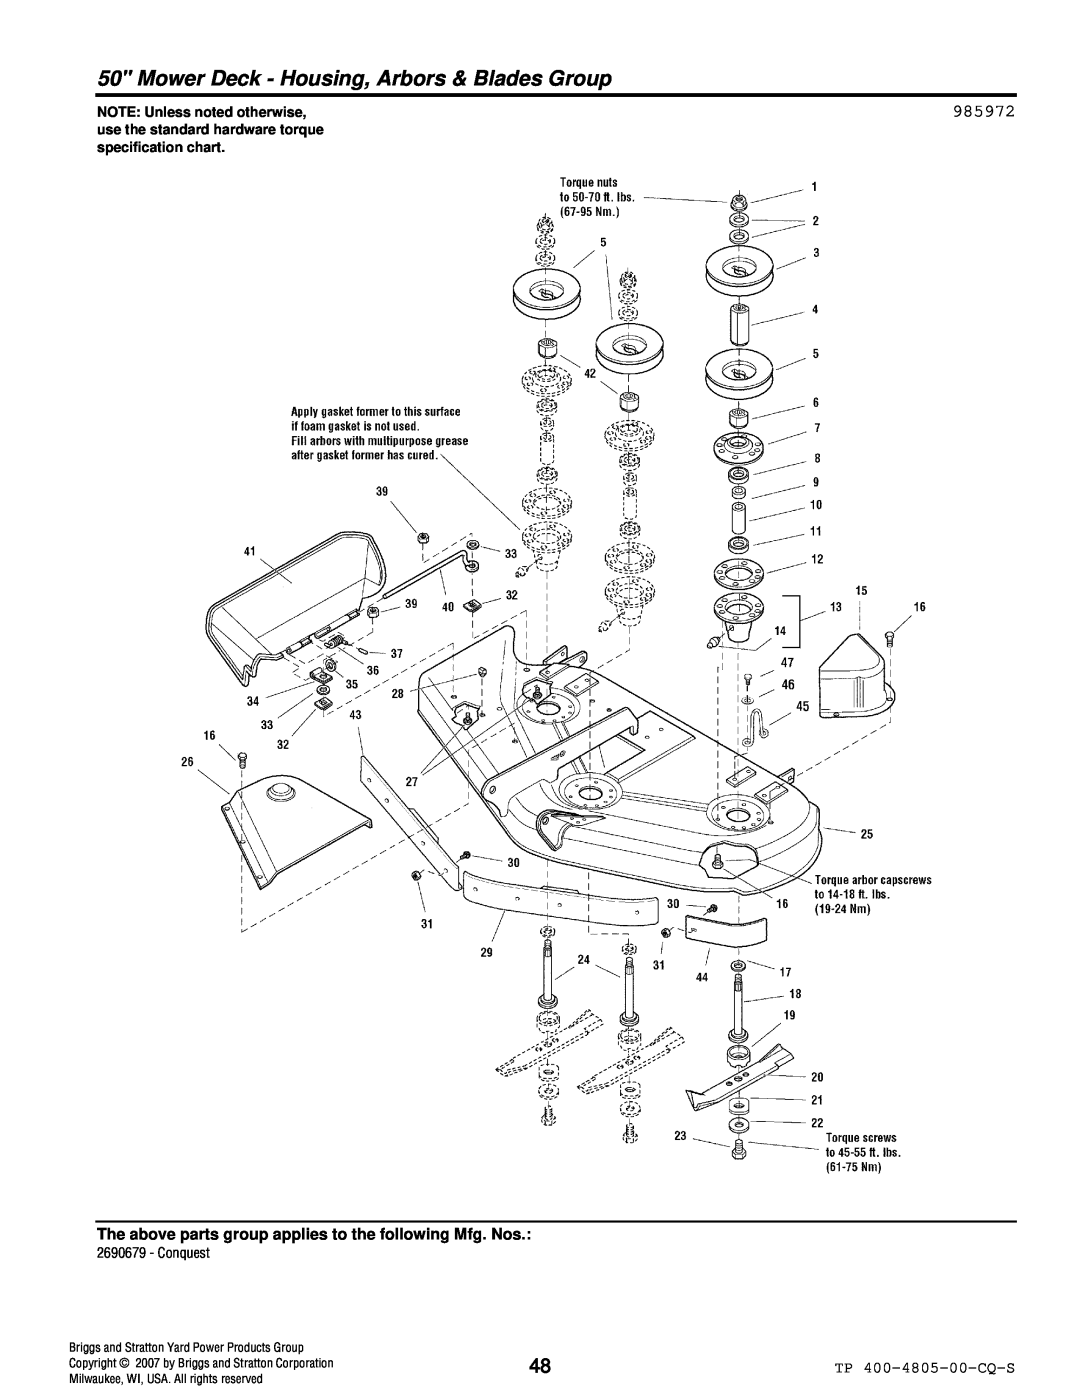 Simplicity 4WD Series manual 985972, Mower Deck - Housing, Arbors & Blades Group, NOTE Unless noted otherwise 